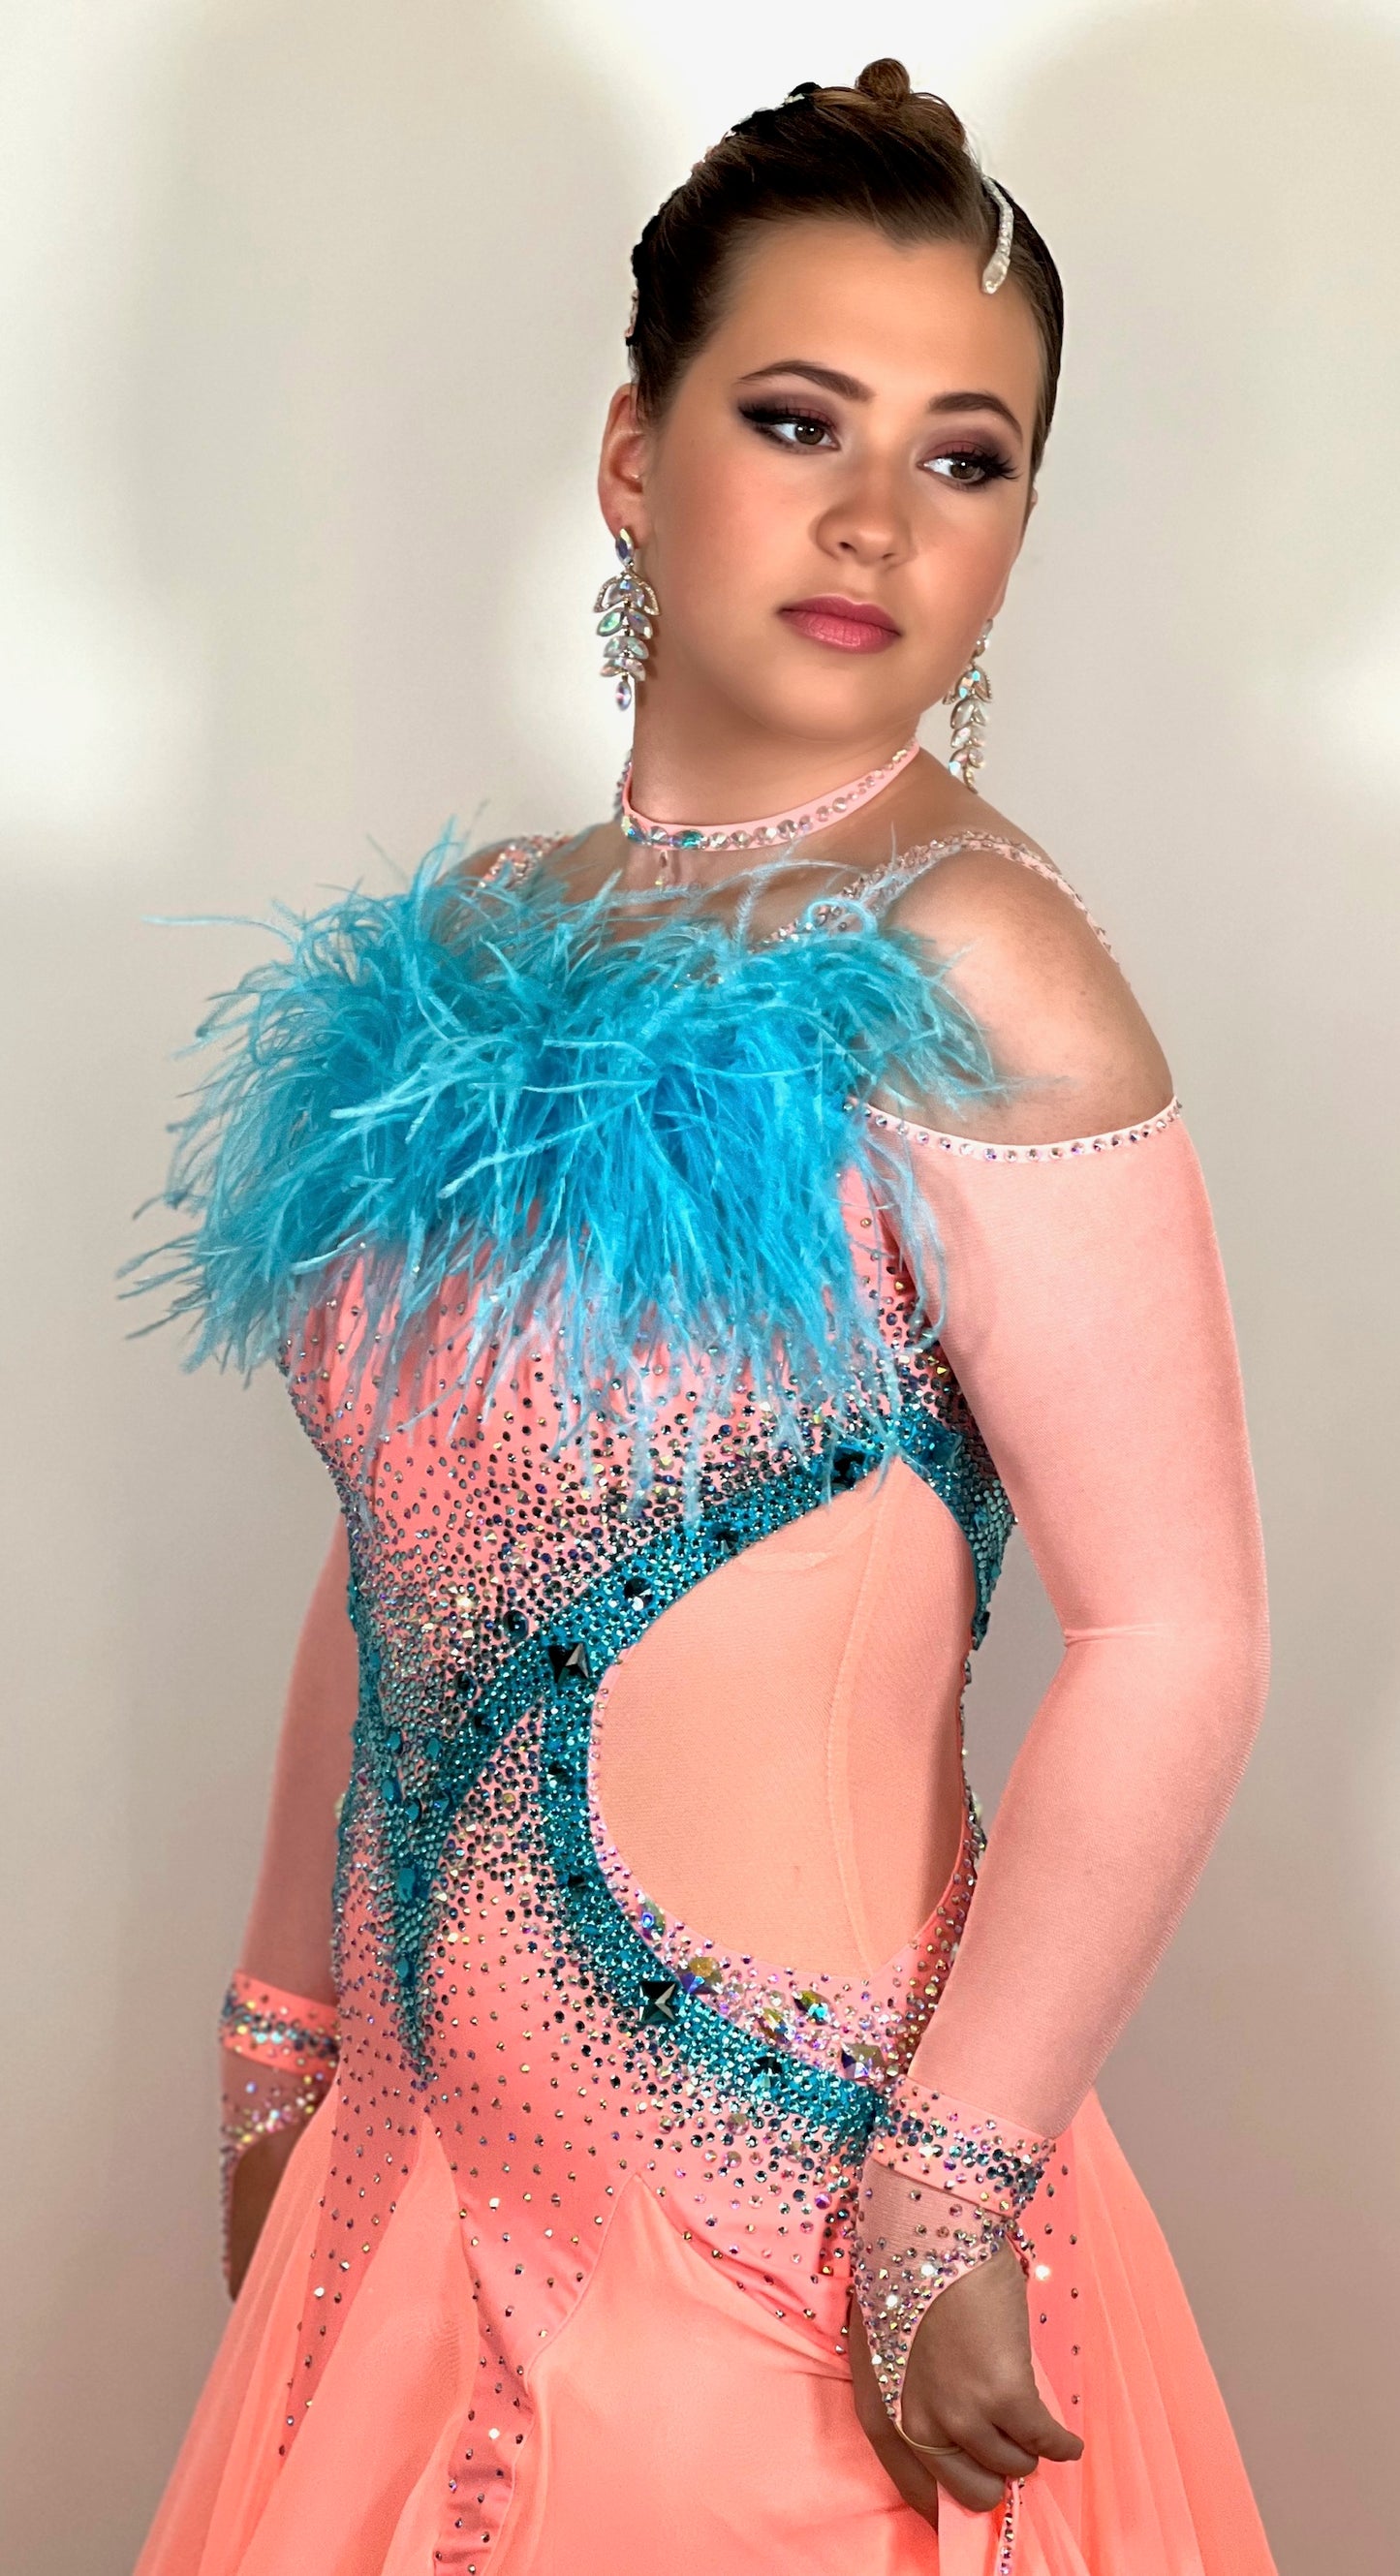 0111 Peach & Paradise Blue Competition Ballroom Dance Dress. Ostrich feather boa floats & detail to  the upper chest. Stunning stone decorations in paradise blue & AB